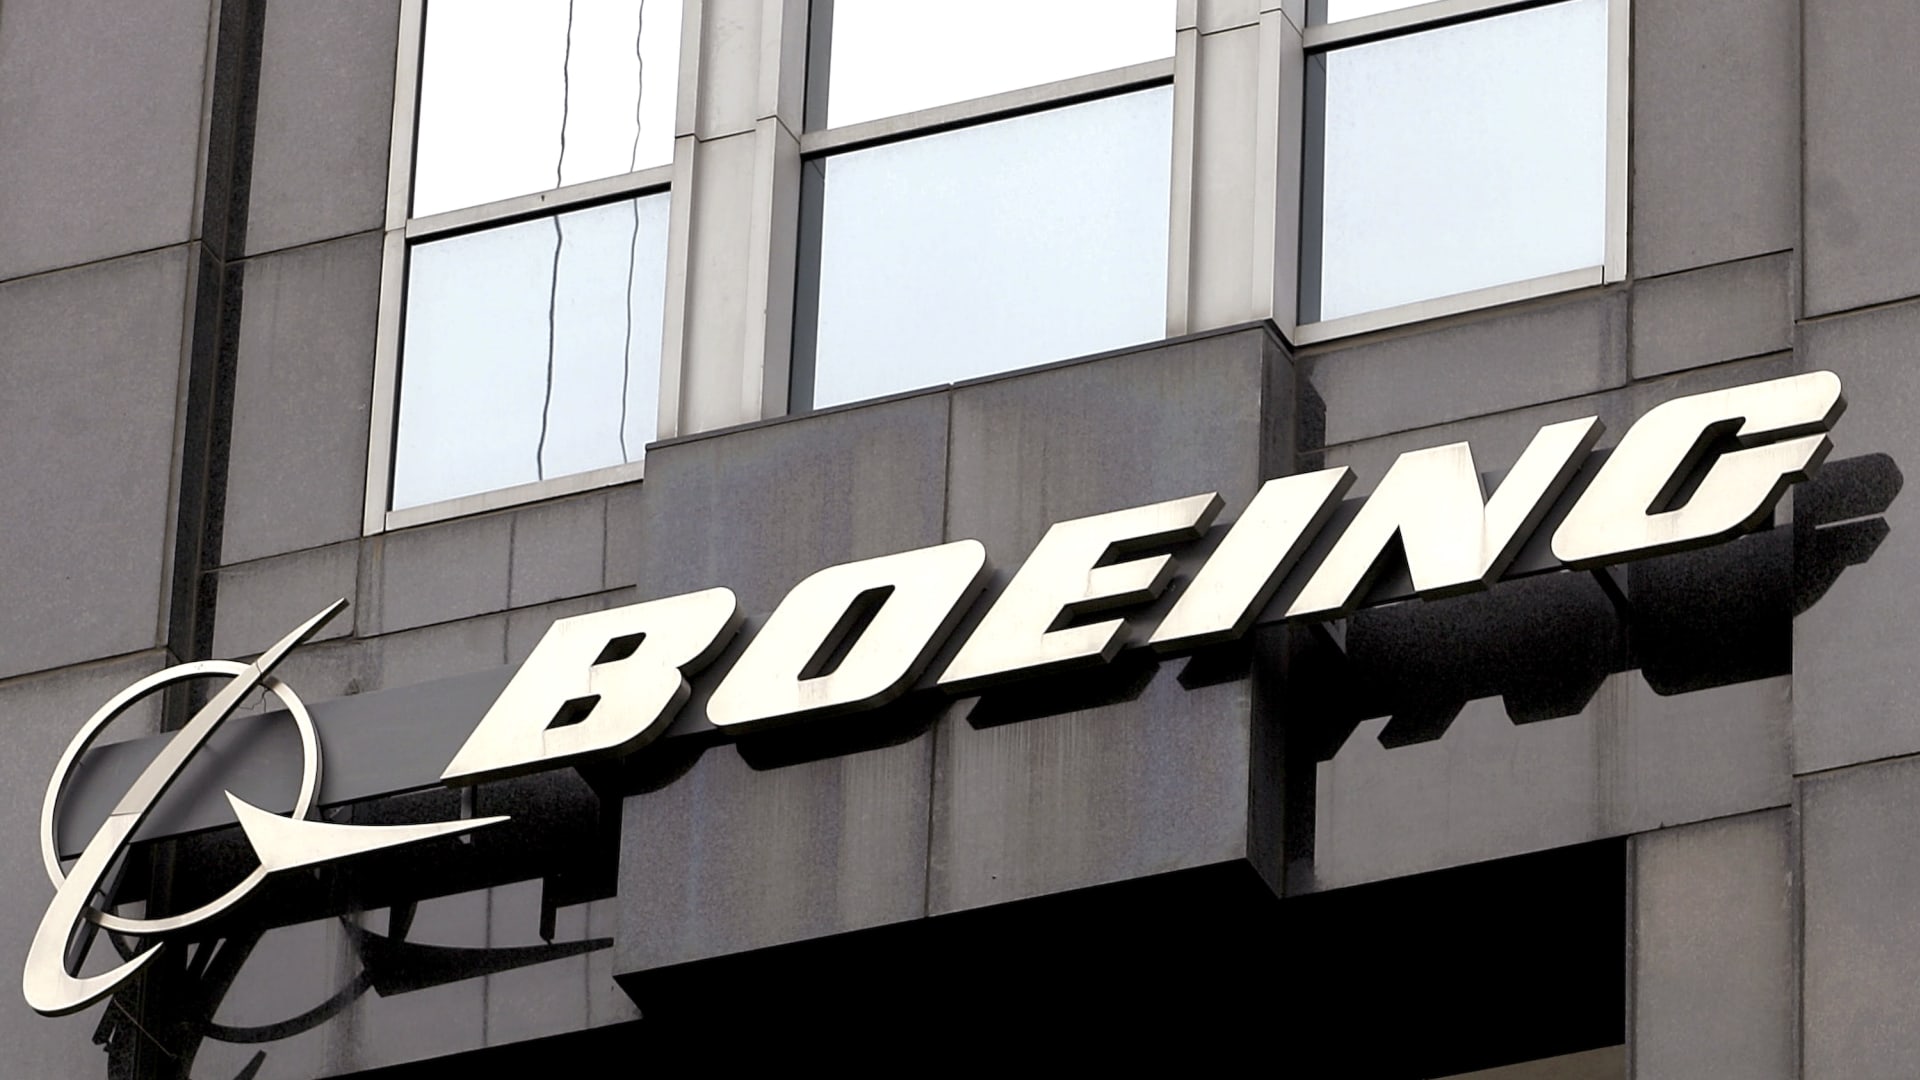 Signage is displayed on the headquarters building of Boeing Co. in Chicago, Illinois, U.S., on Monday, April 27, 2009. Boeing Co. last week lowered its 2009 profit forecast less than analysts predicted, reaffirming the year's delivery schedule even as the recession prompts airlines to defer orders and forces the planemaker to further delay a model.